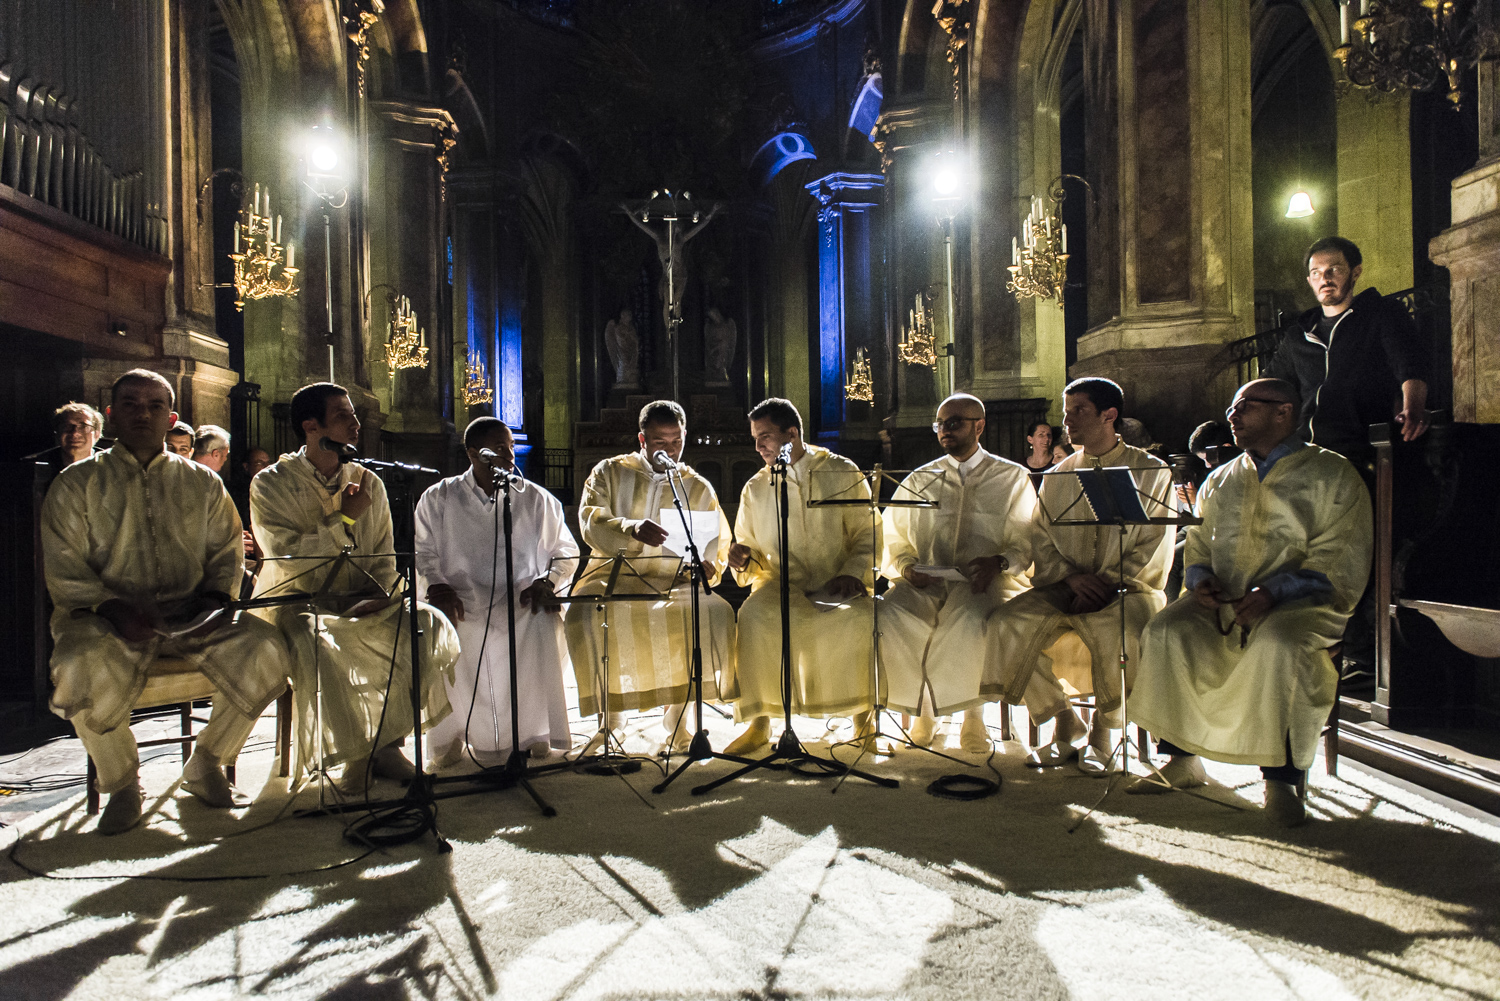 The international Sufi association Alawiyya performs Sufi chants during the inaugural event on 29 May 2016 (photo: Jan Schmidt-Whitley / Le Pictorium)